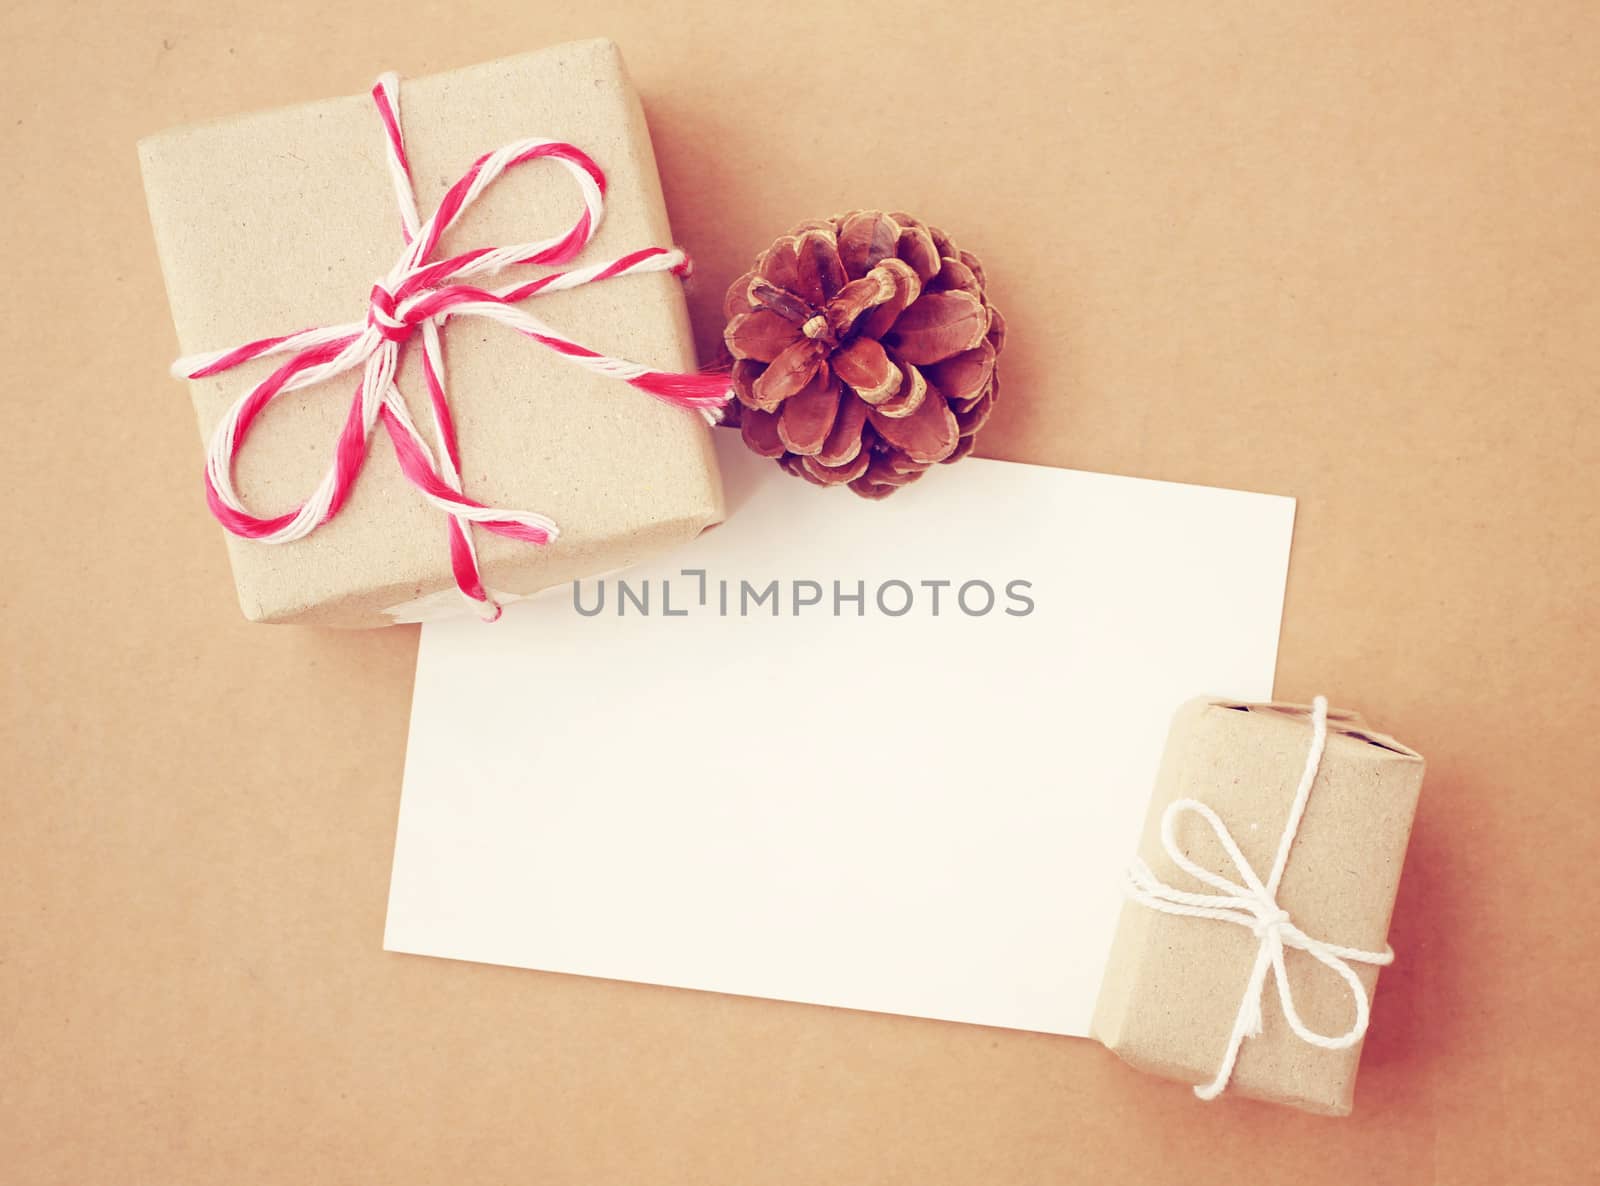 Handmade gift box and blank note paper with pine cone, retro filter effect